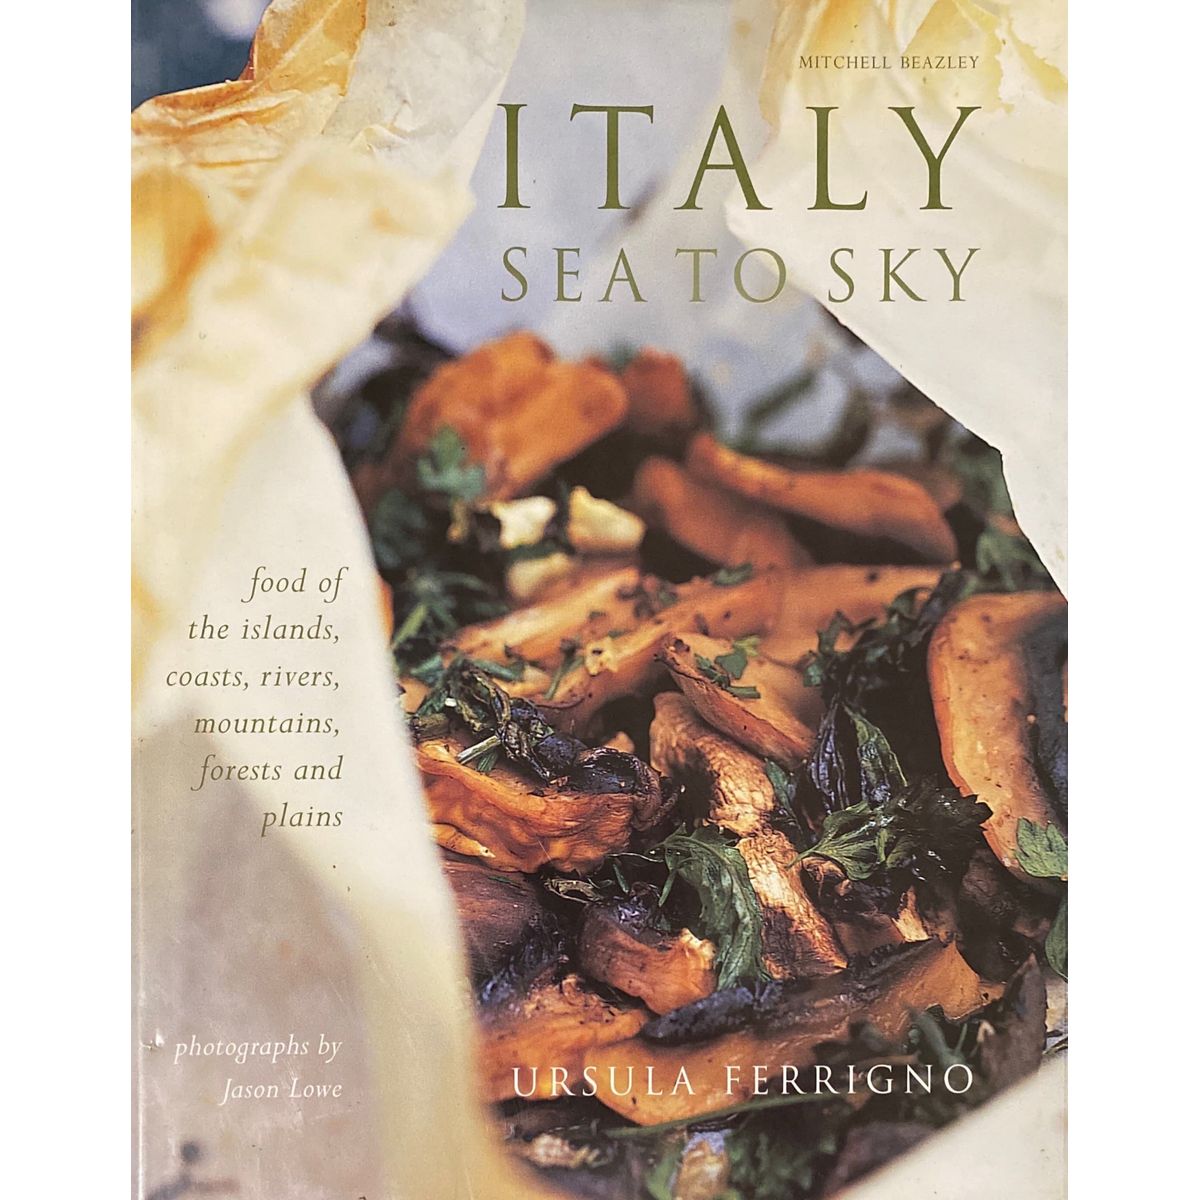 ISBN: 9781840006001 / 1840006005 - Italy: Sea to Sky: Food of the Islands, Coasts, Rivers, Mountains, Forests and Plains by Ursula Ferrigno [2003]